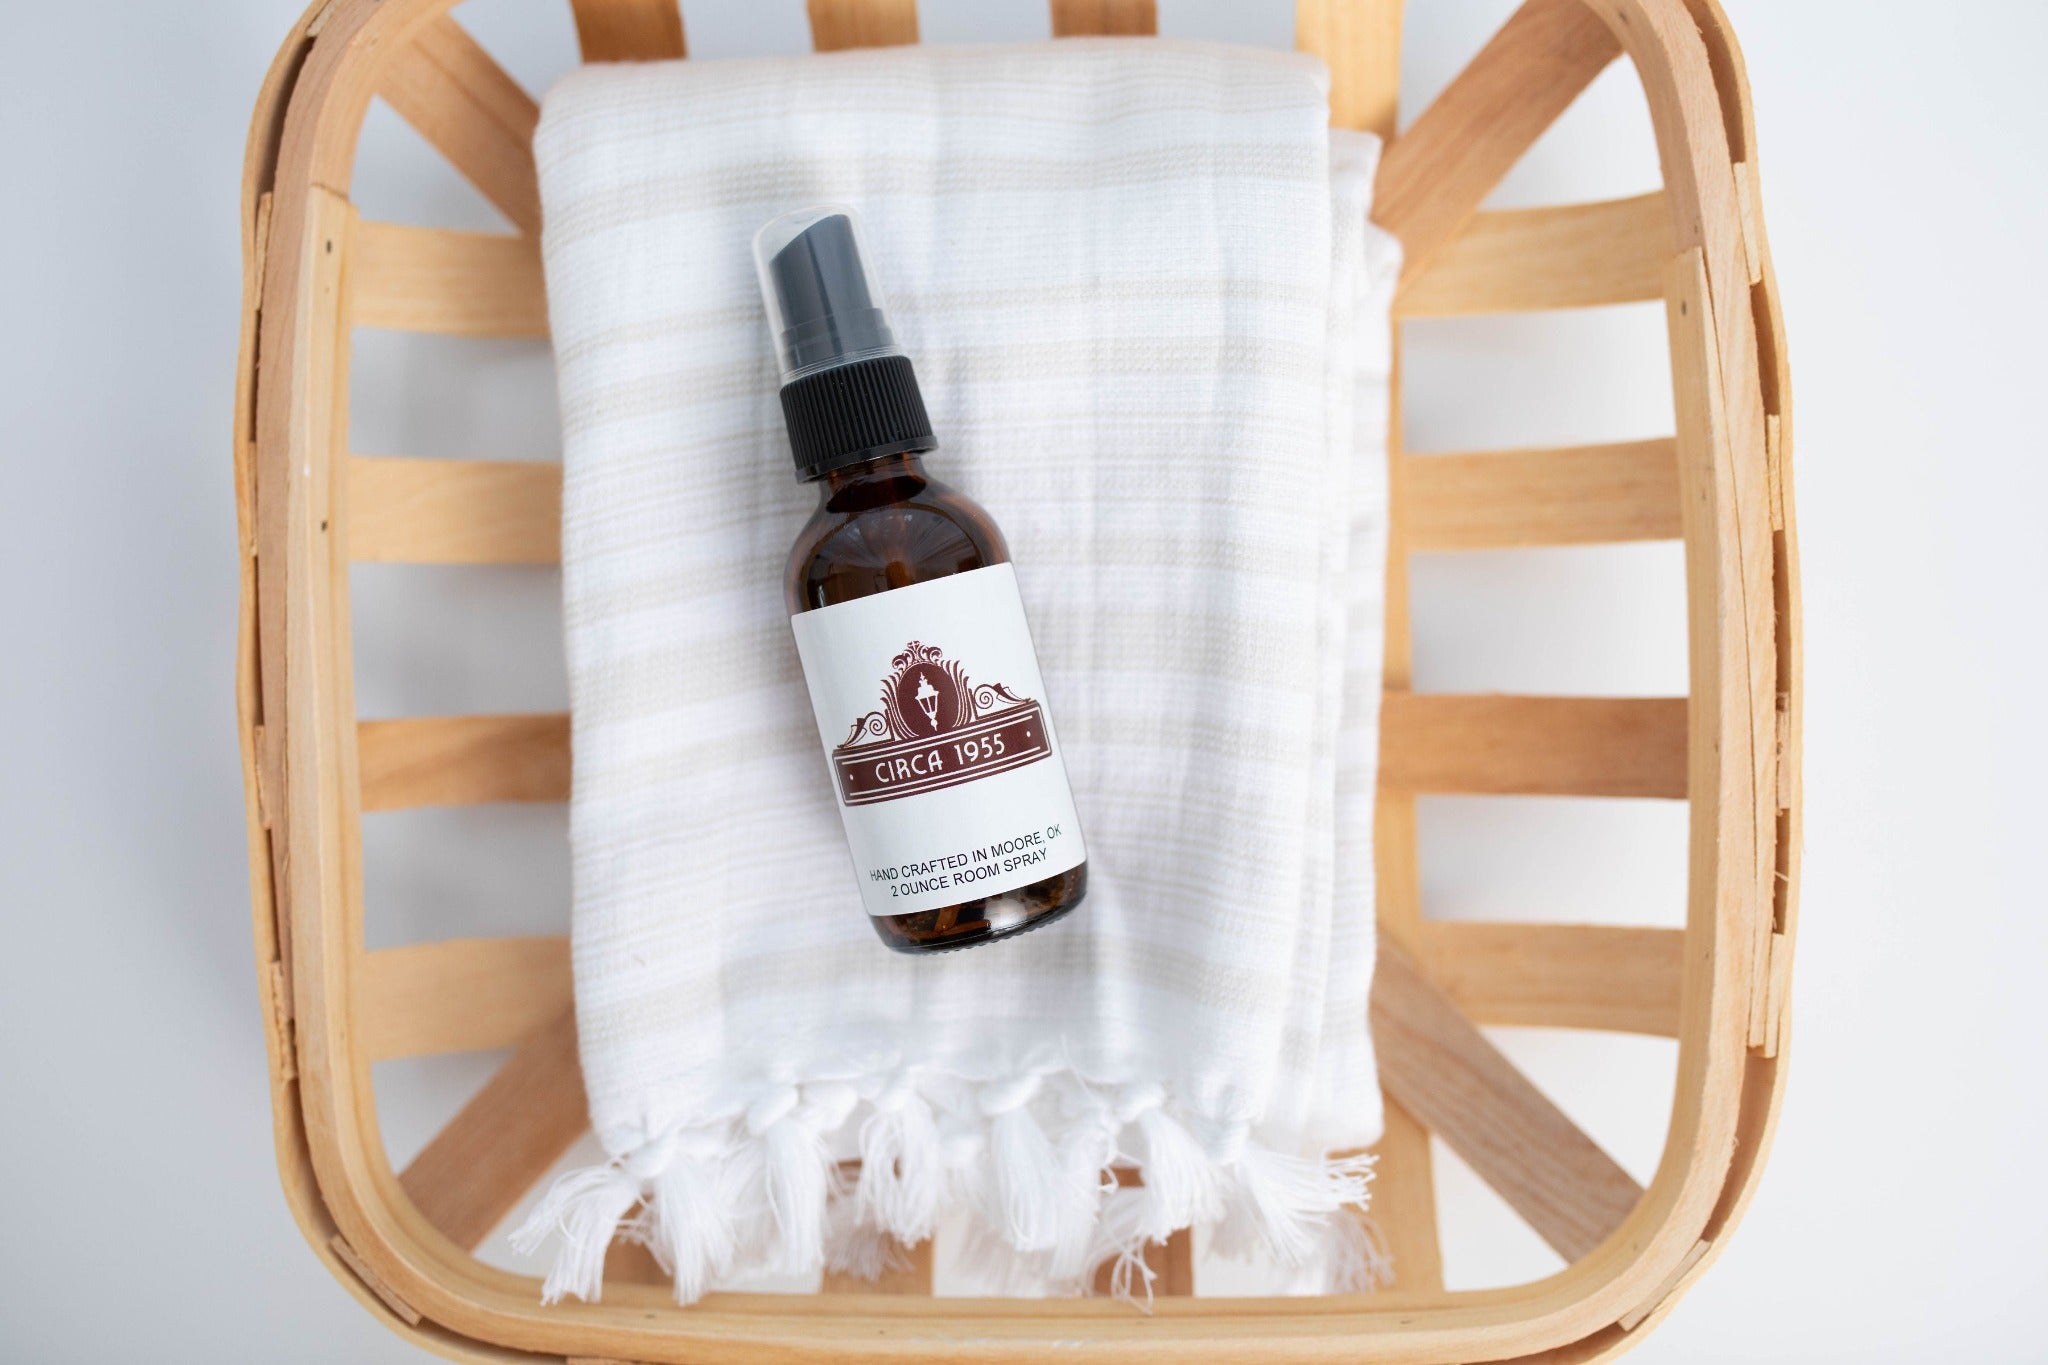 An amber glass bottle laying on top of a natural linen towel above a slatted wood bowl or tray.